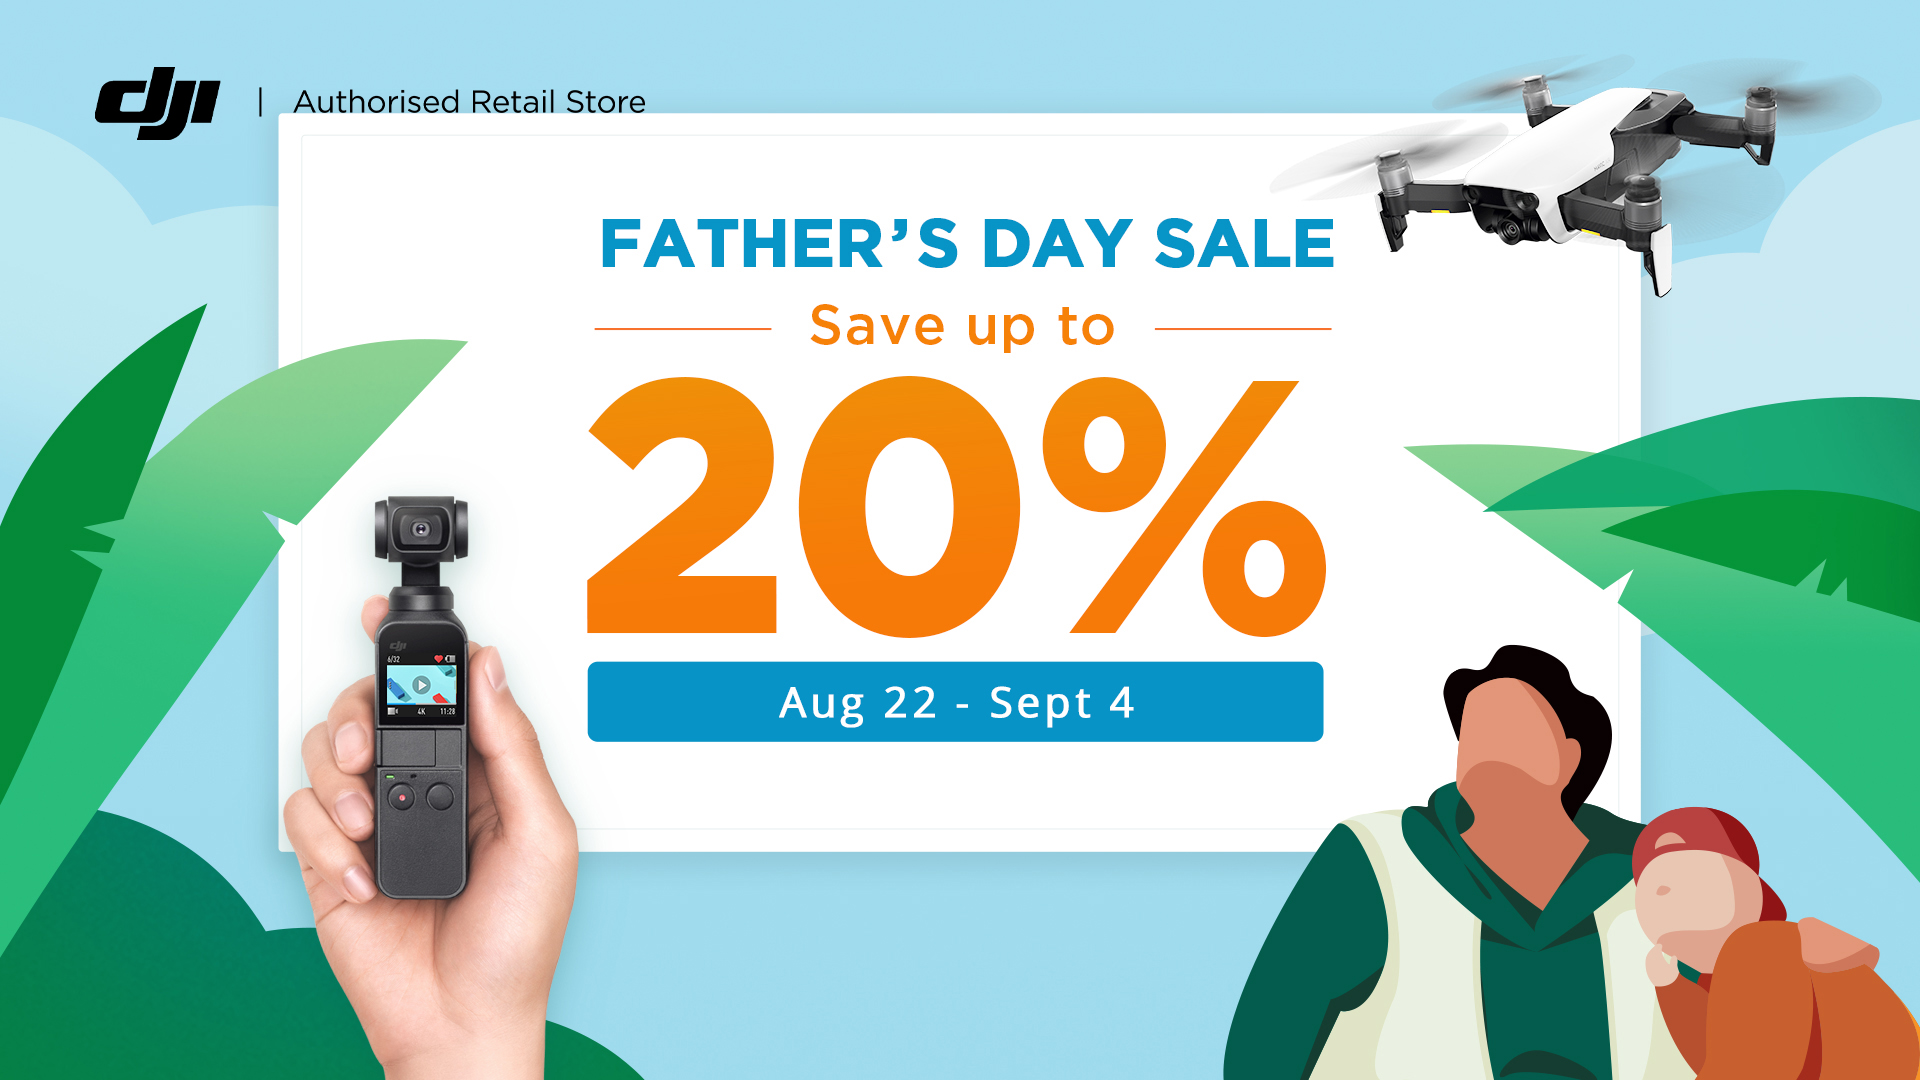 Father's Day Sale 2019 - Save up to 20%! 